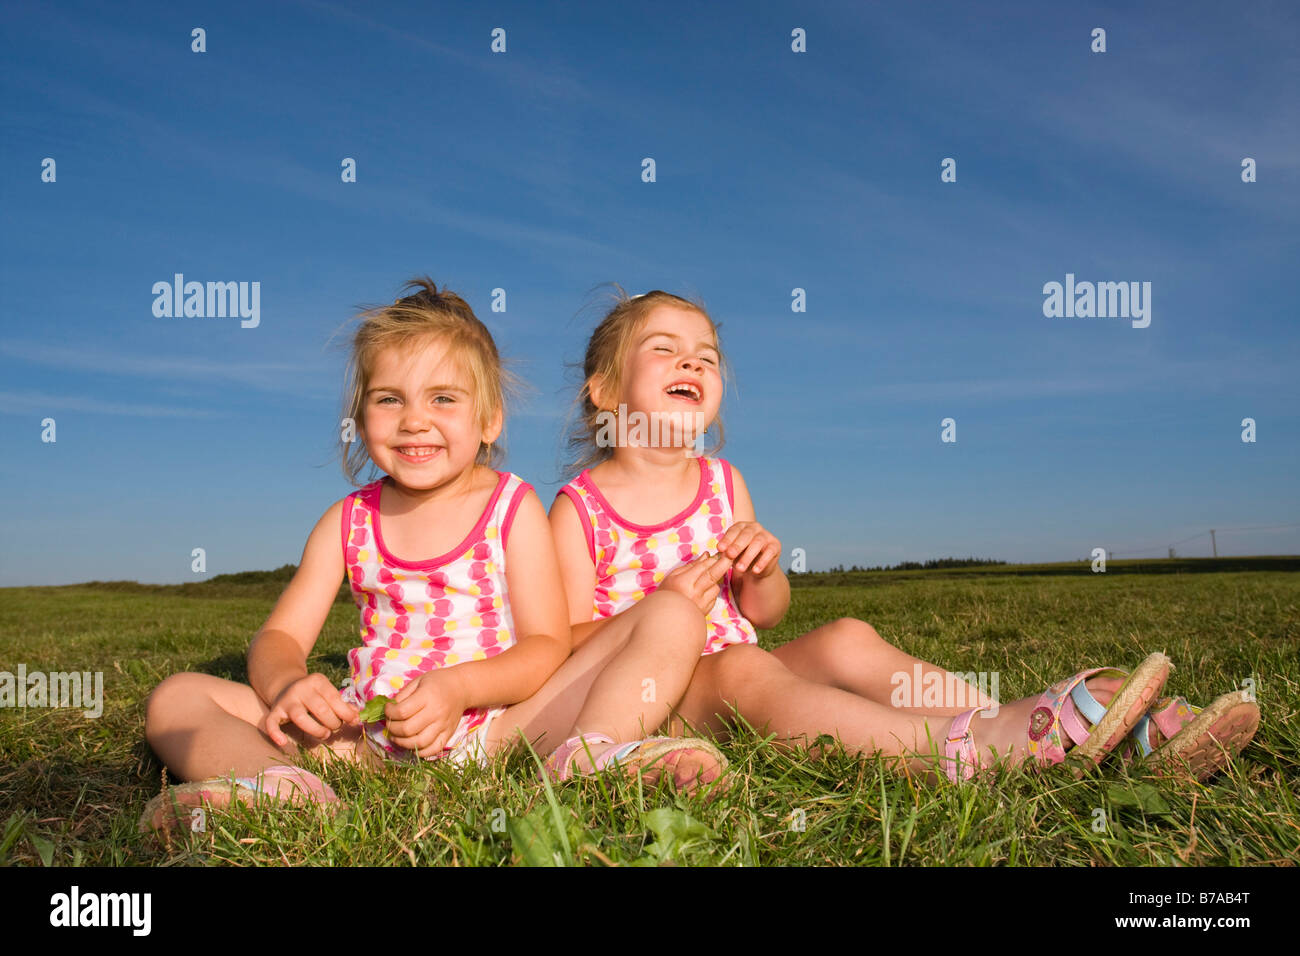 3 year old smiling twin girls sitting on grass in summer Stock Photo